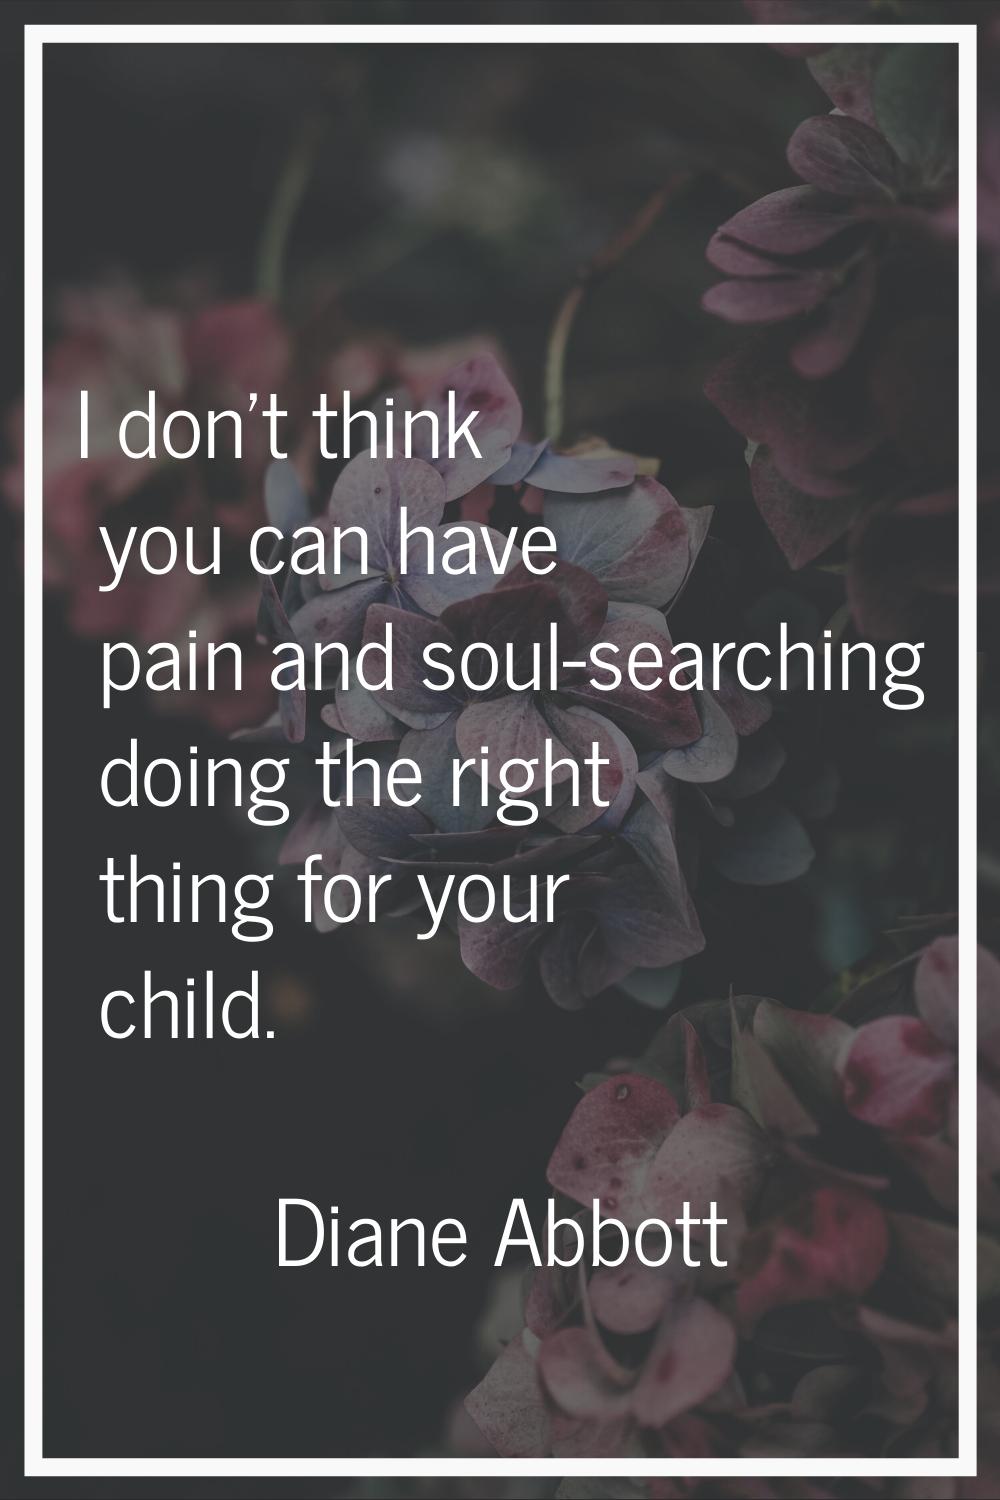 I don't think you can have pain and soul-searching doing the right thing for your child.